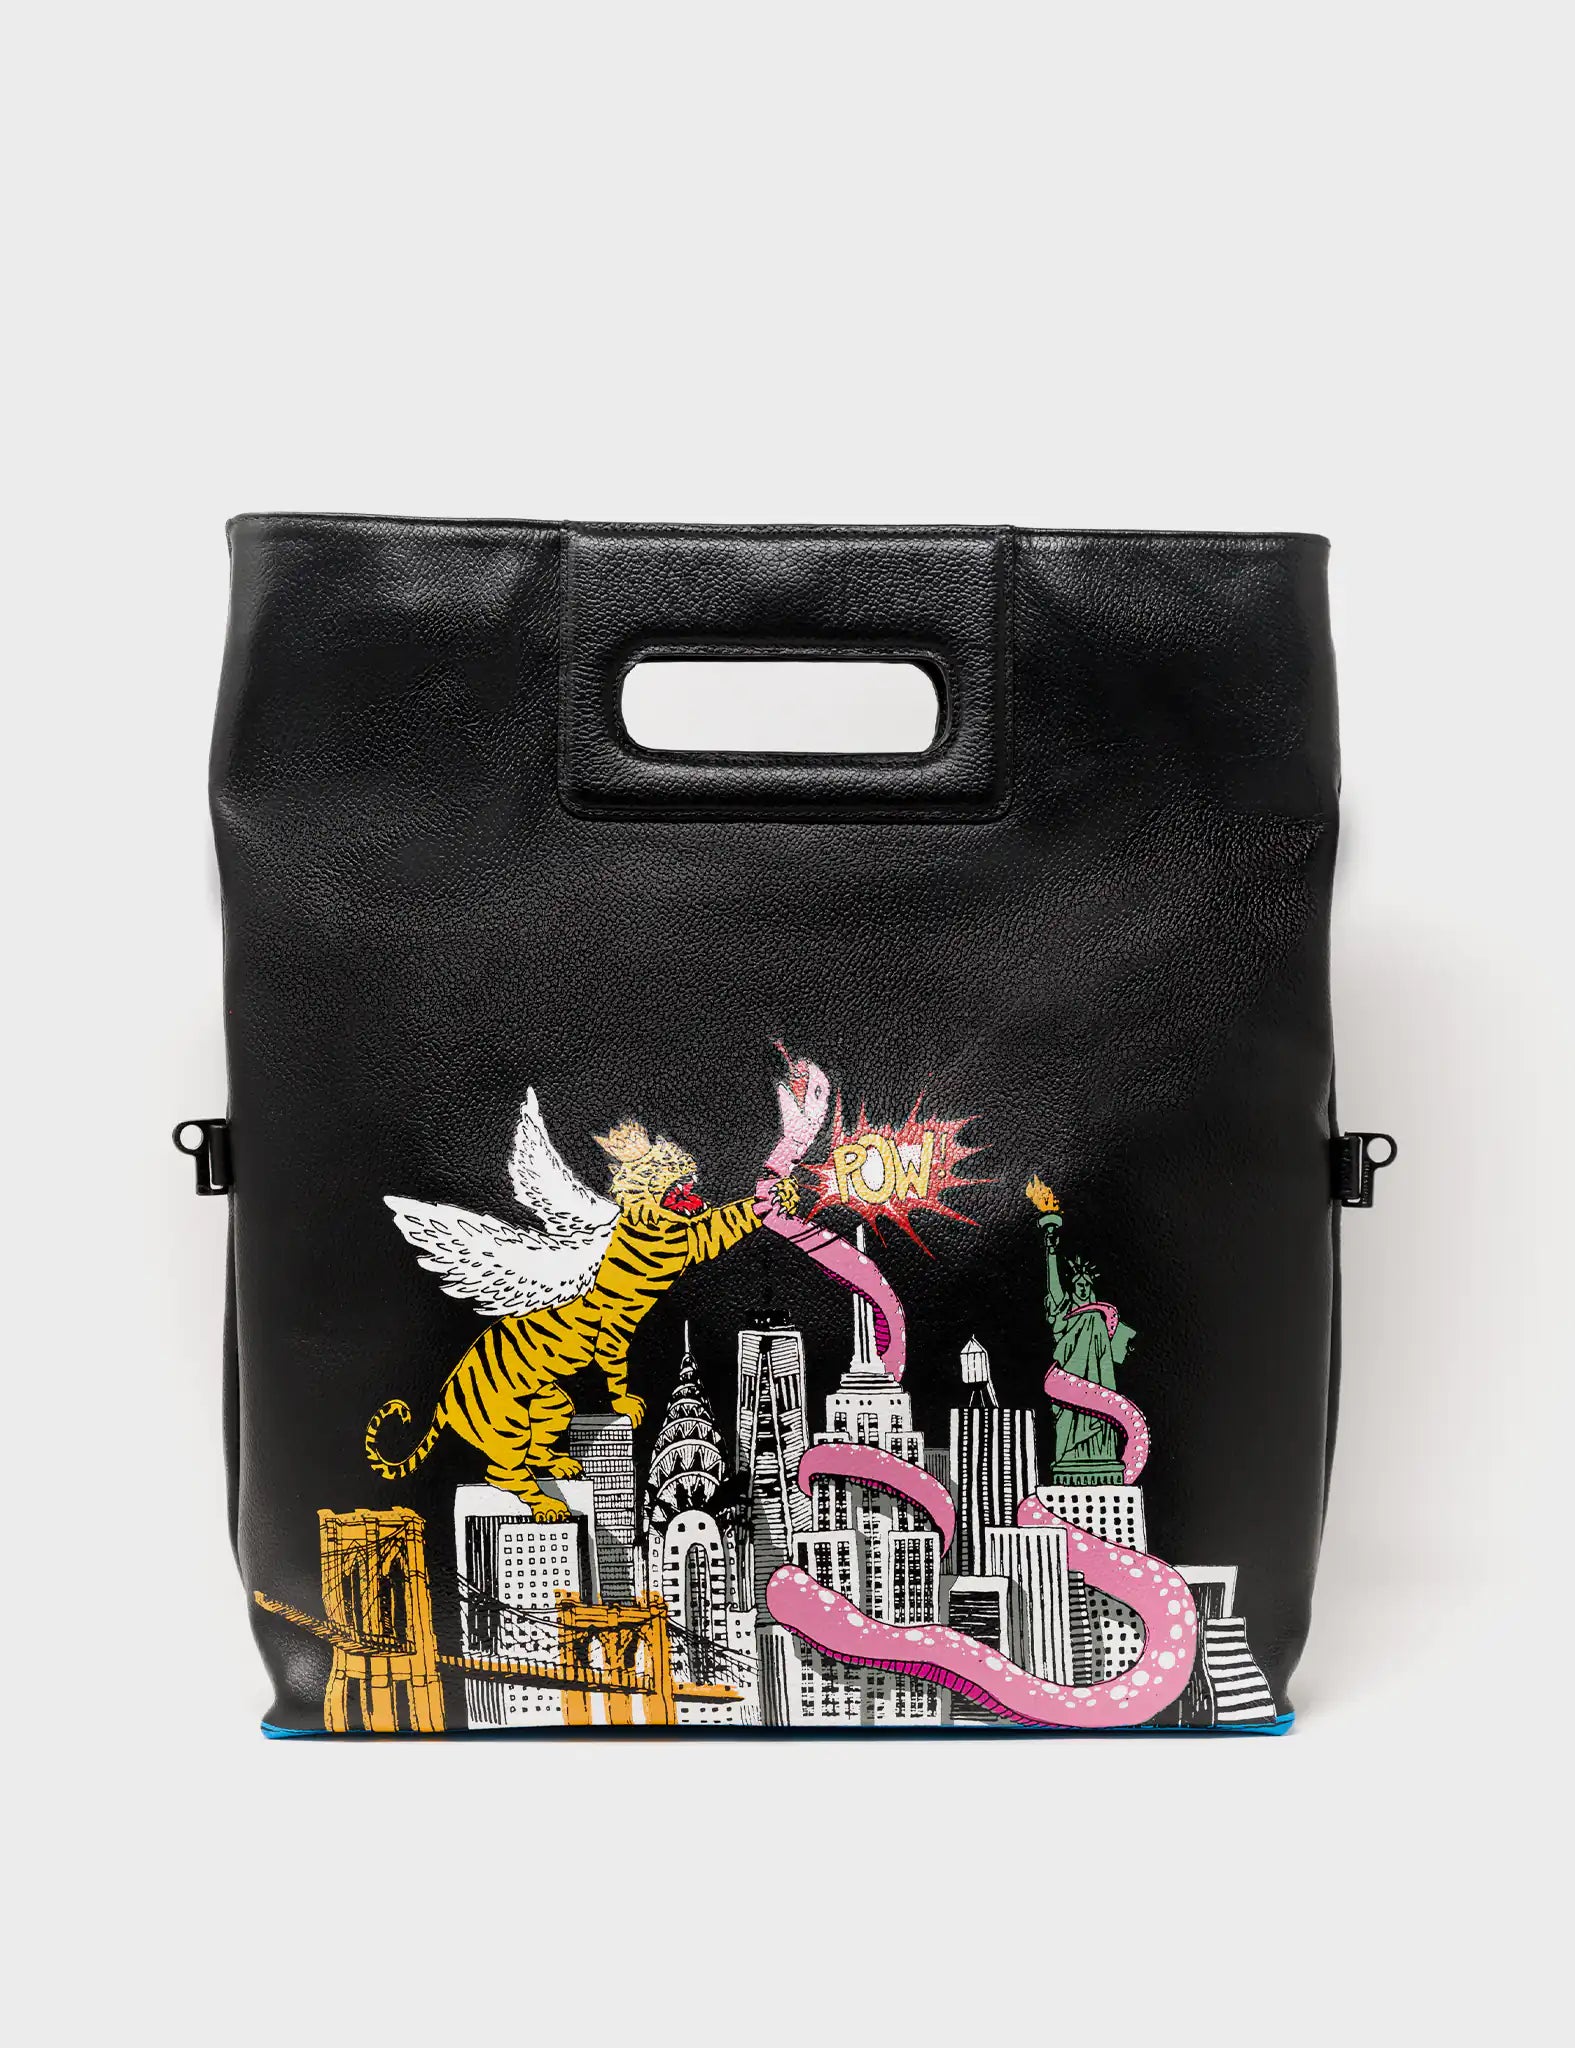 Convertible Crossbody Bag - Black Leather New york skyline tiger and snake Print - front